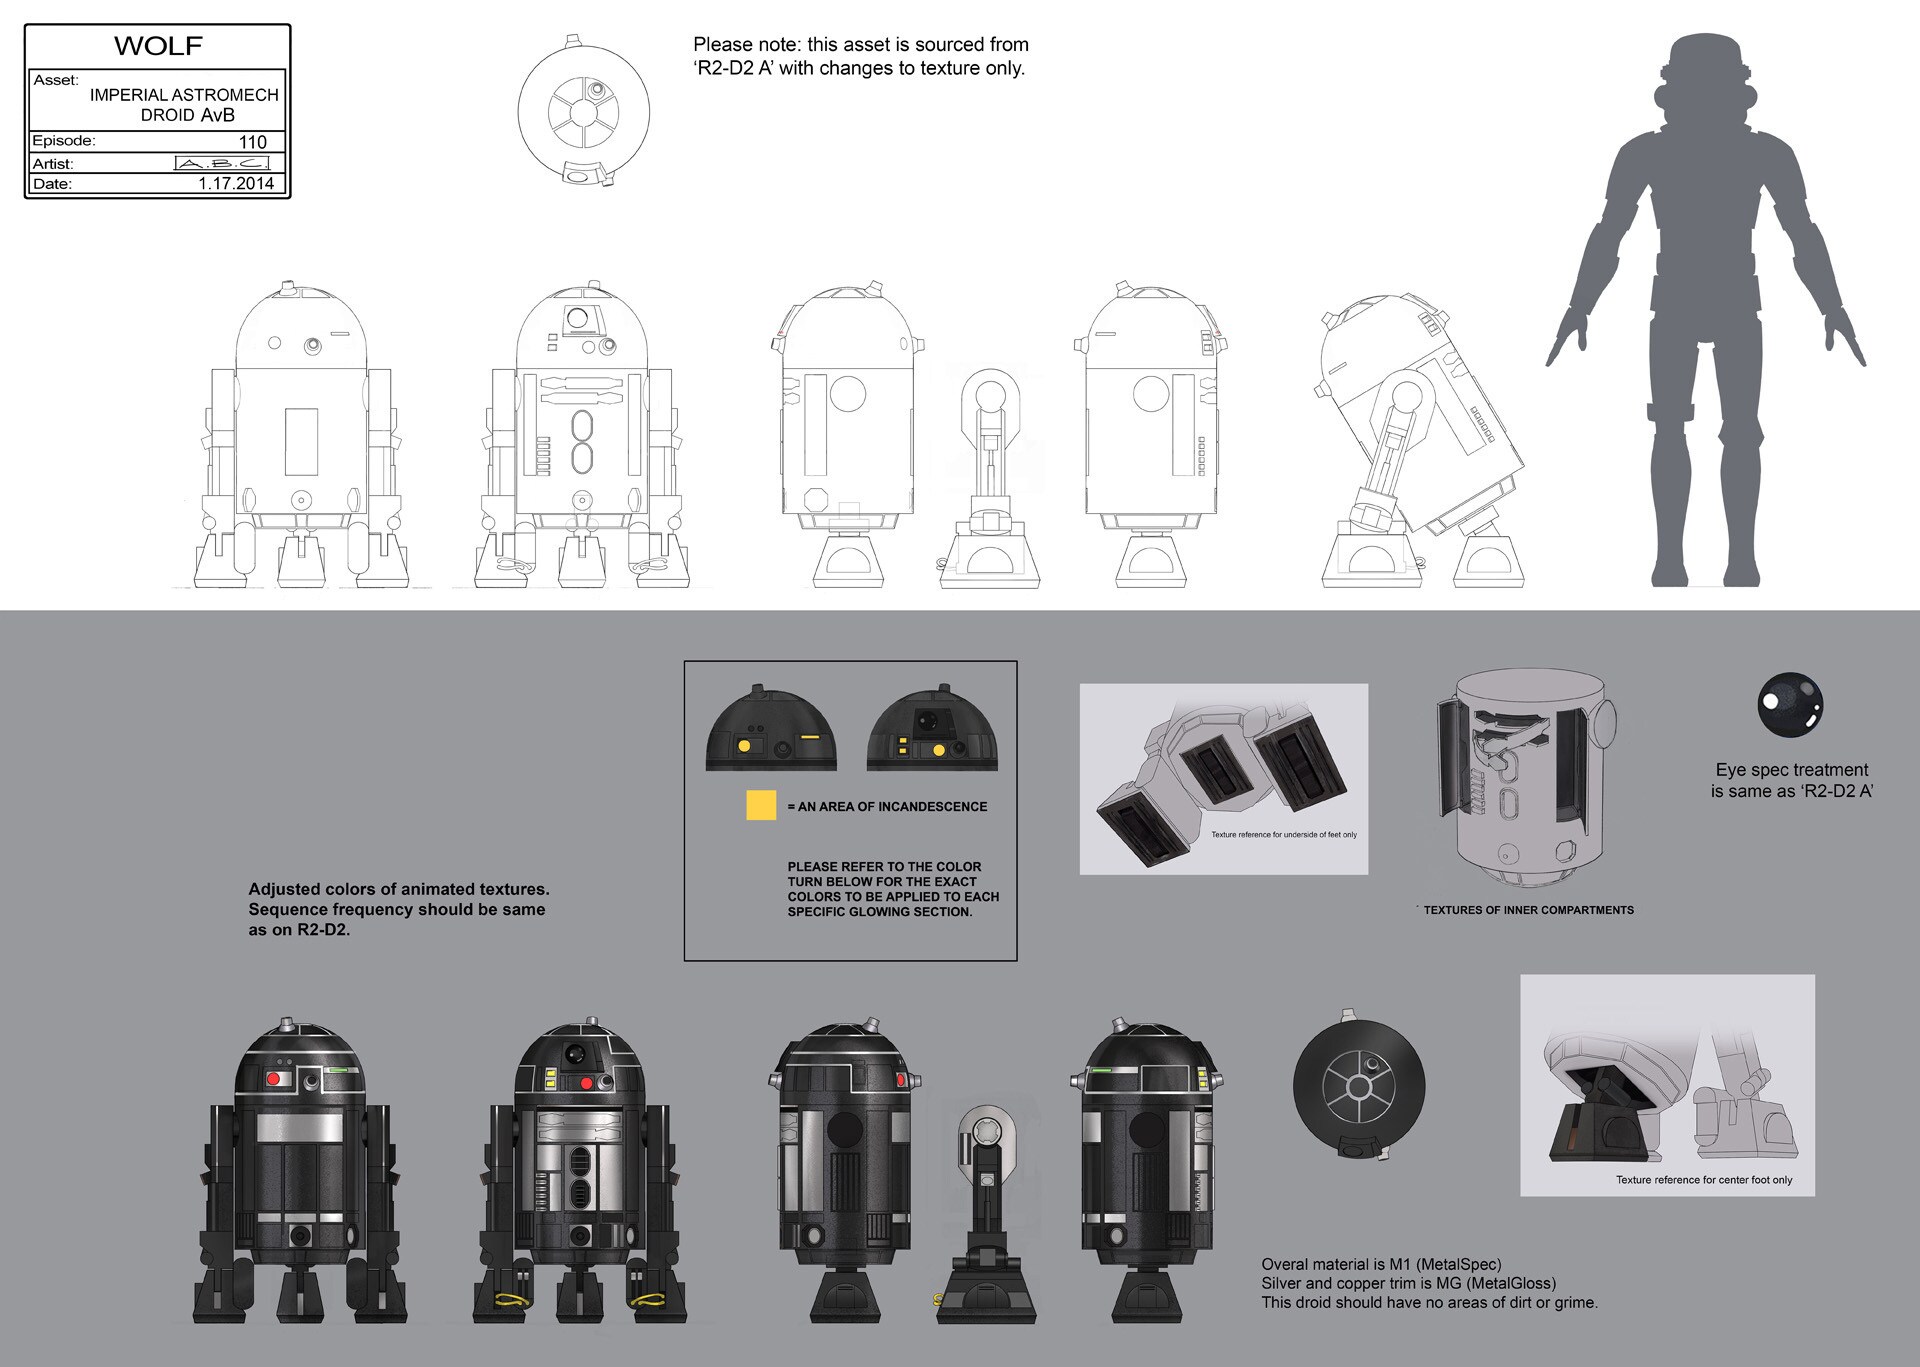 Imperial astromech droid illustration by Amy Beth Christenson.